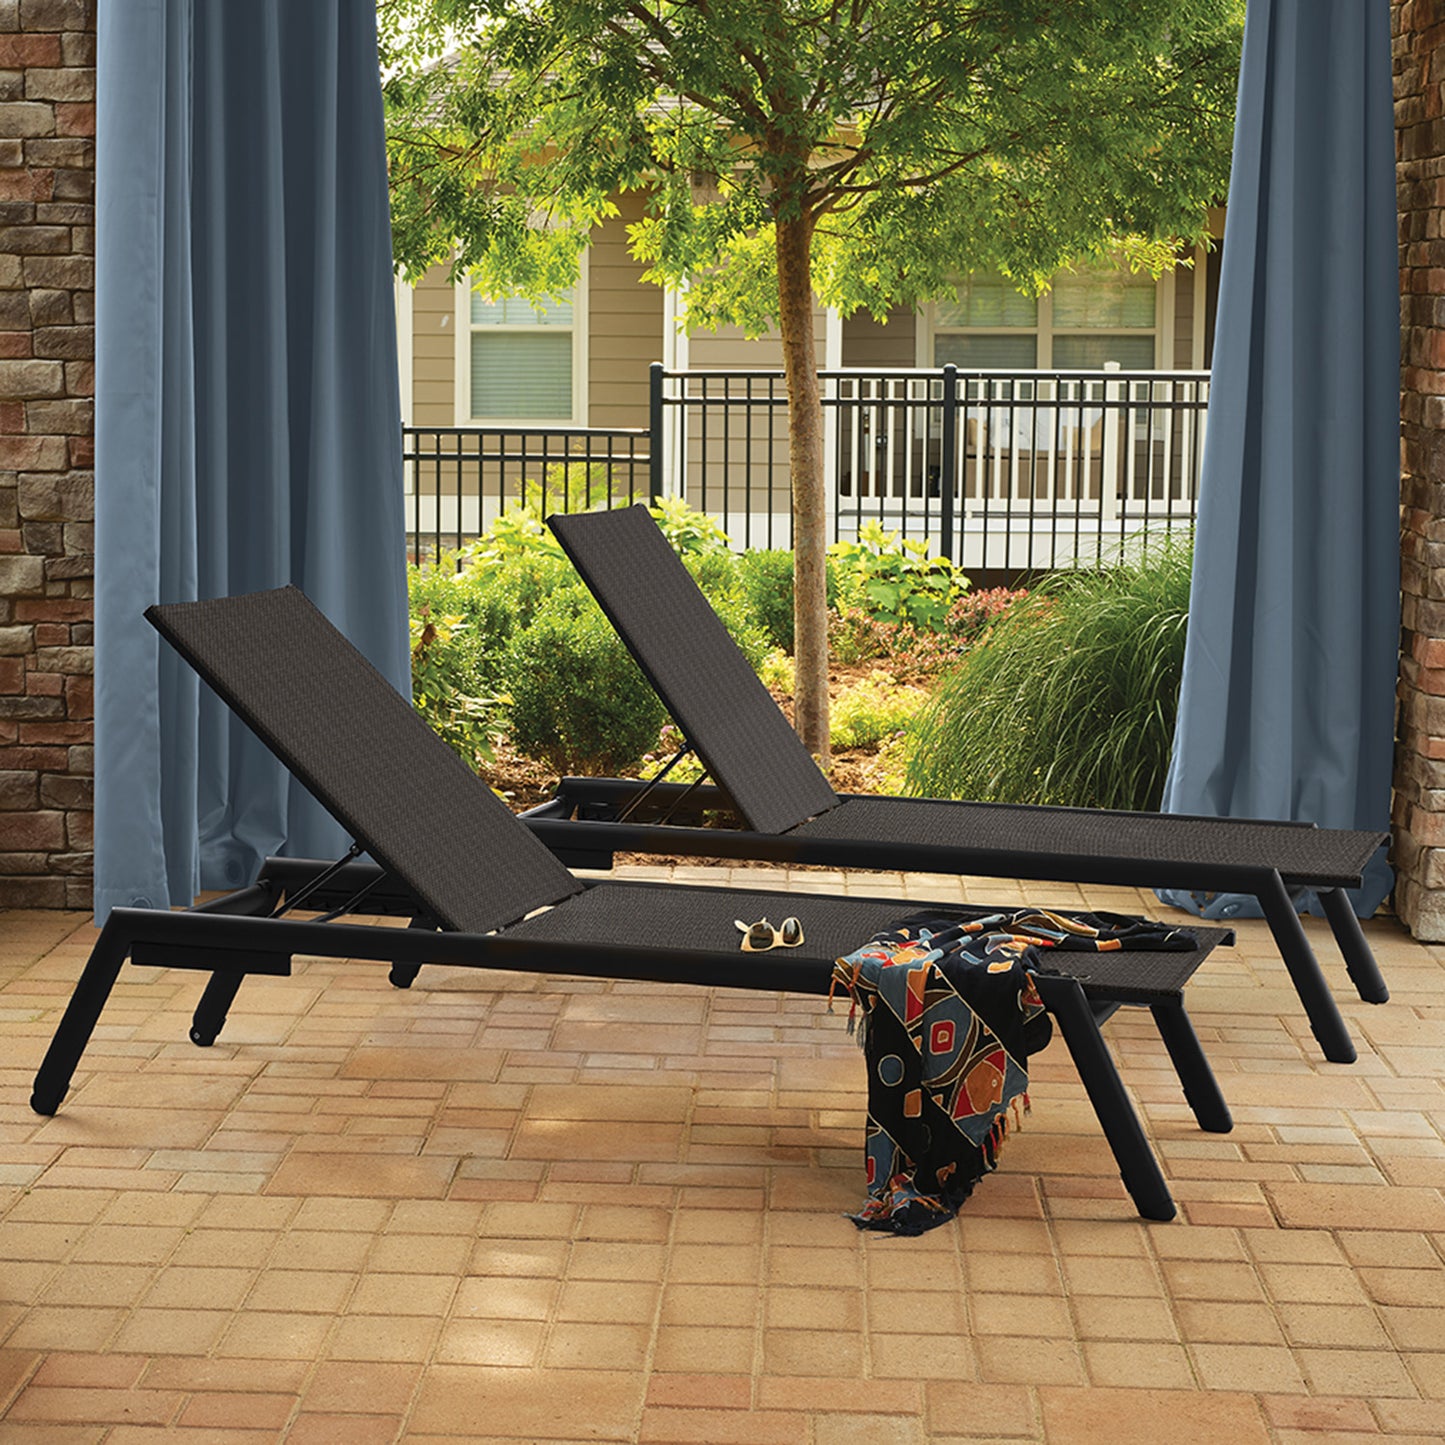 Eiland Armless Chaise Lounge - Ninja seat and Carbon Powder-Coated Aluminum frame